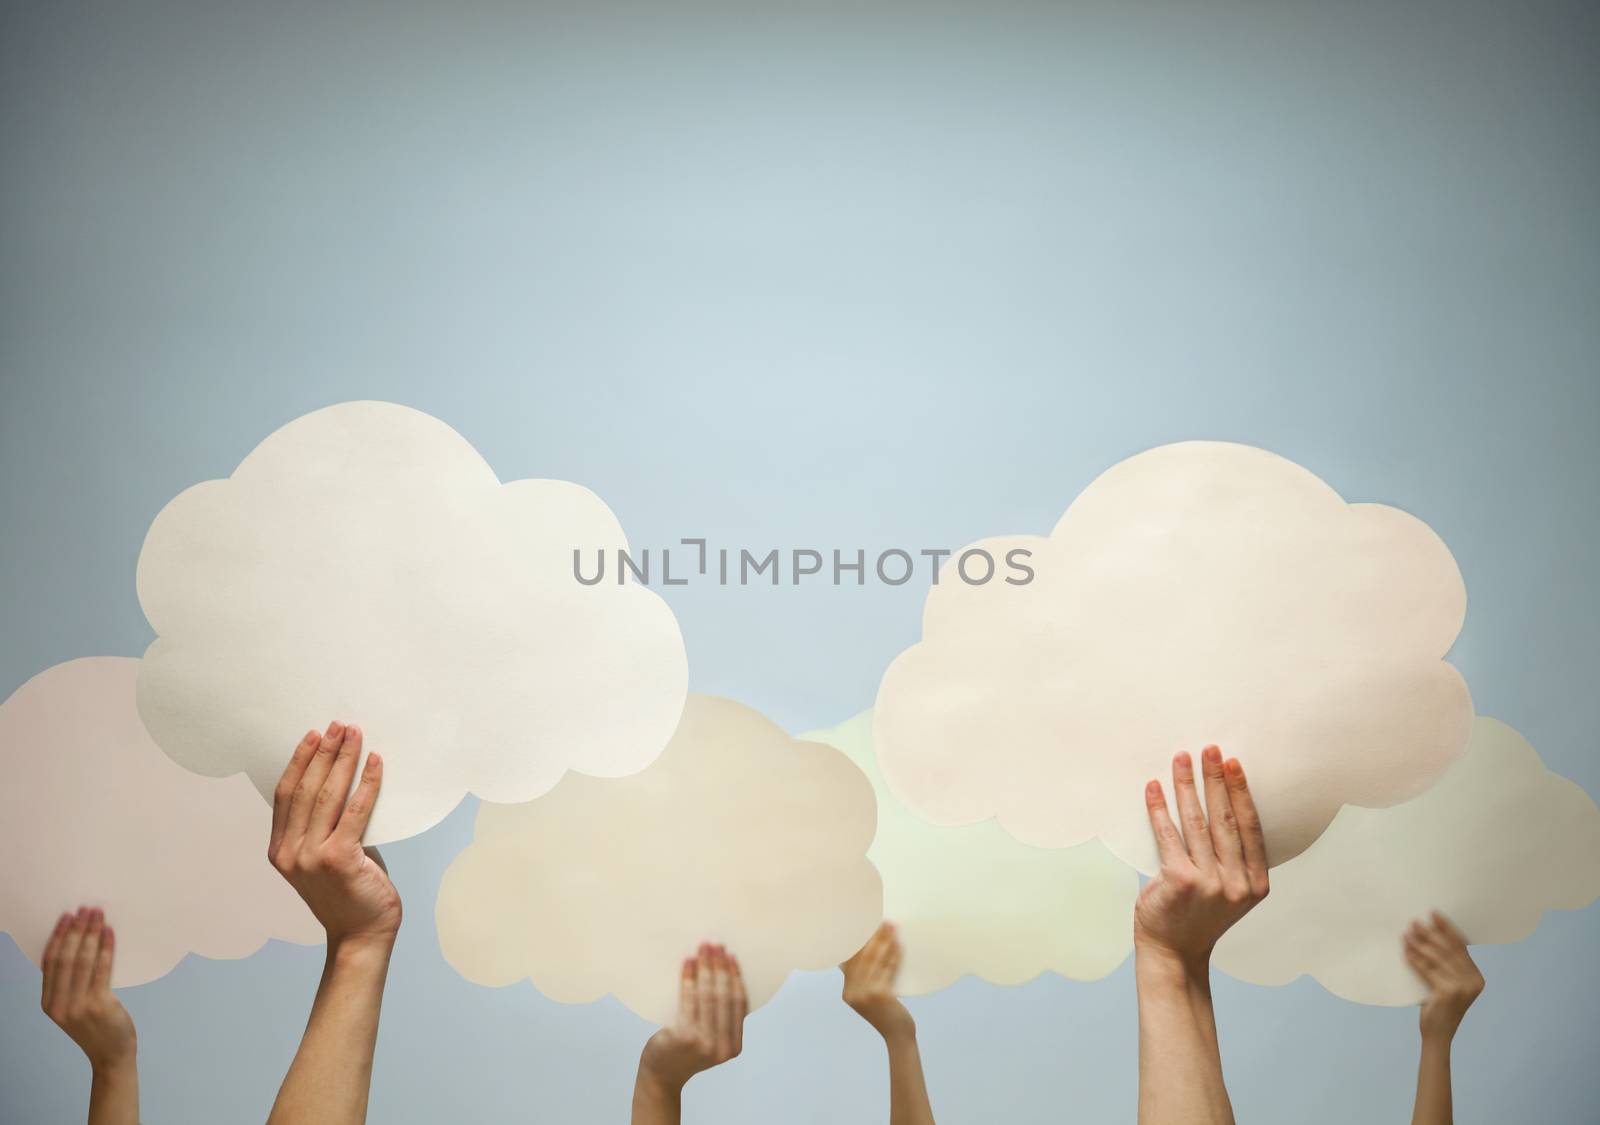 Multiple hands holding cut out paper clouds against a blue background, studio shot by XiXinXing